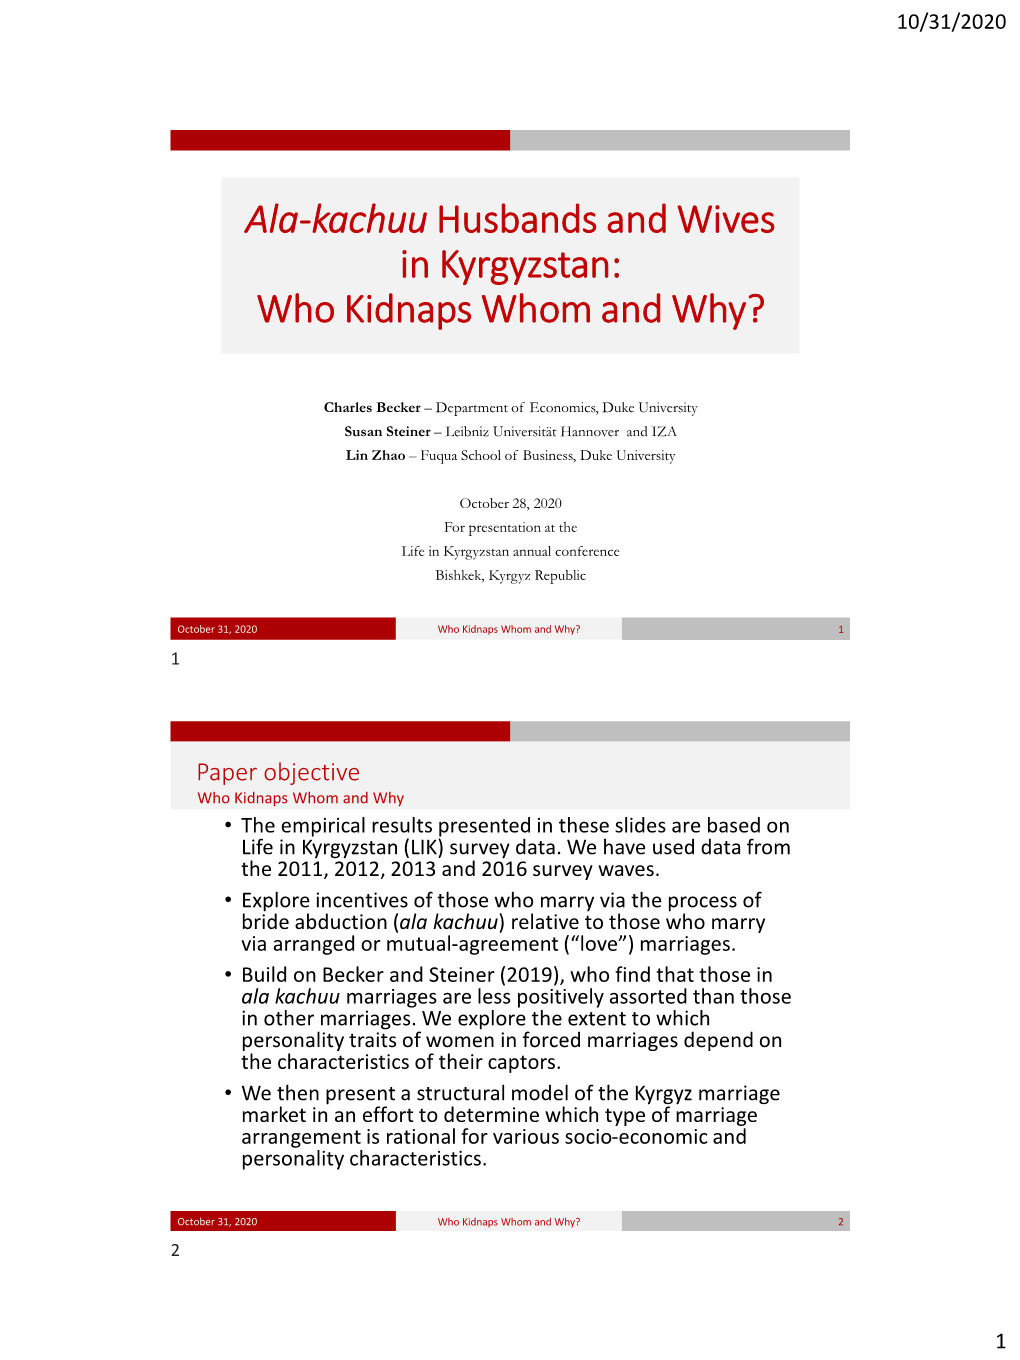 Ala-Kachuu Husbands and Wives in Kyrgyzstan: Who Kidnaps Whom and Why?